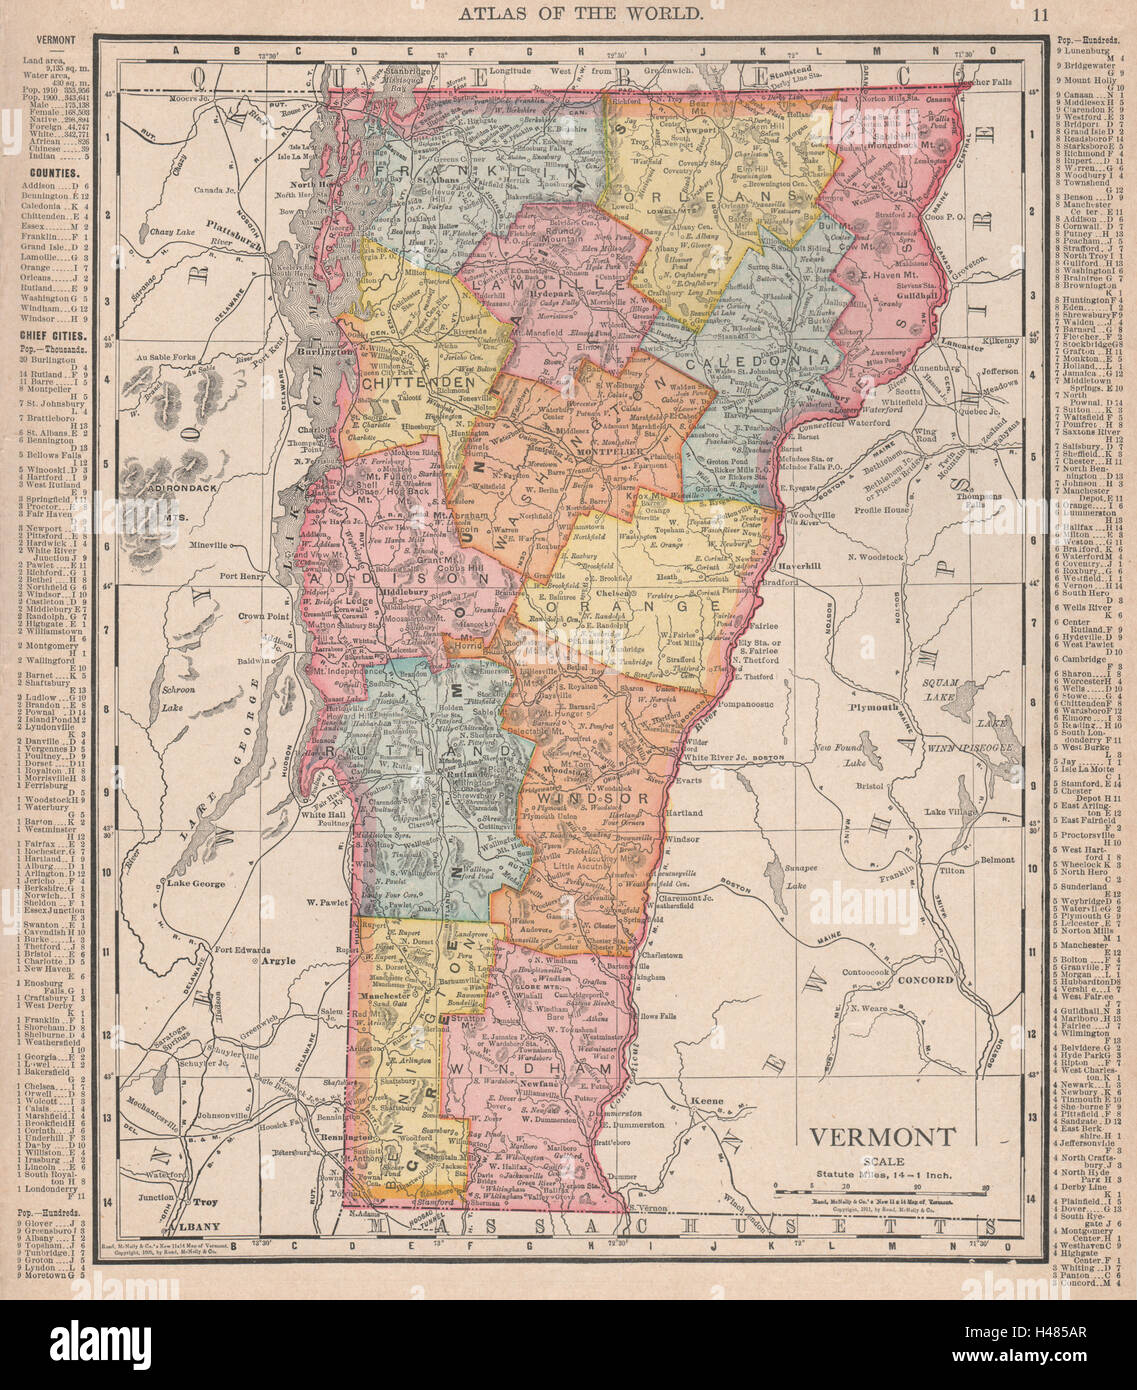 Vermont state map showing counties. RAND MCNALLY 1912 old antique chart Stock Photo